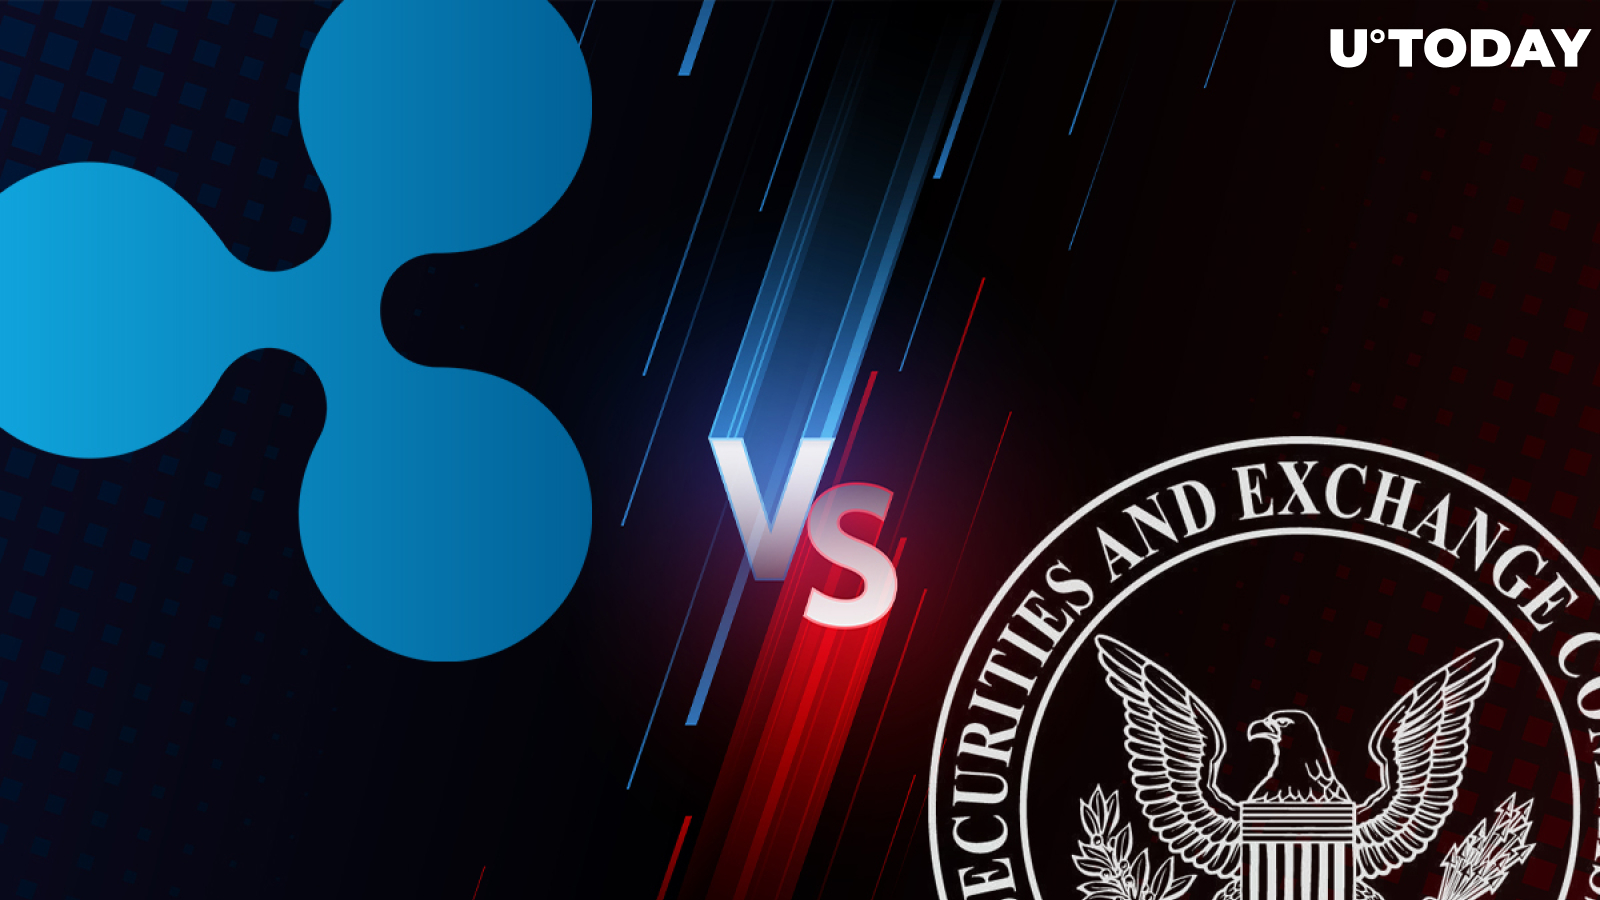 SEC v. Ripple: Court Schedules Telephonic Conference to Discuss Privileged Documents